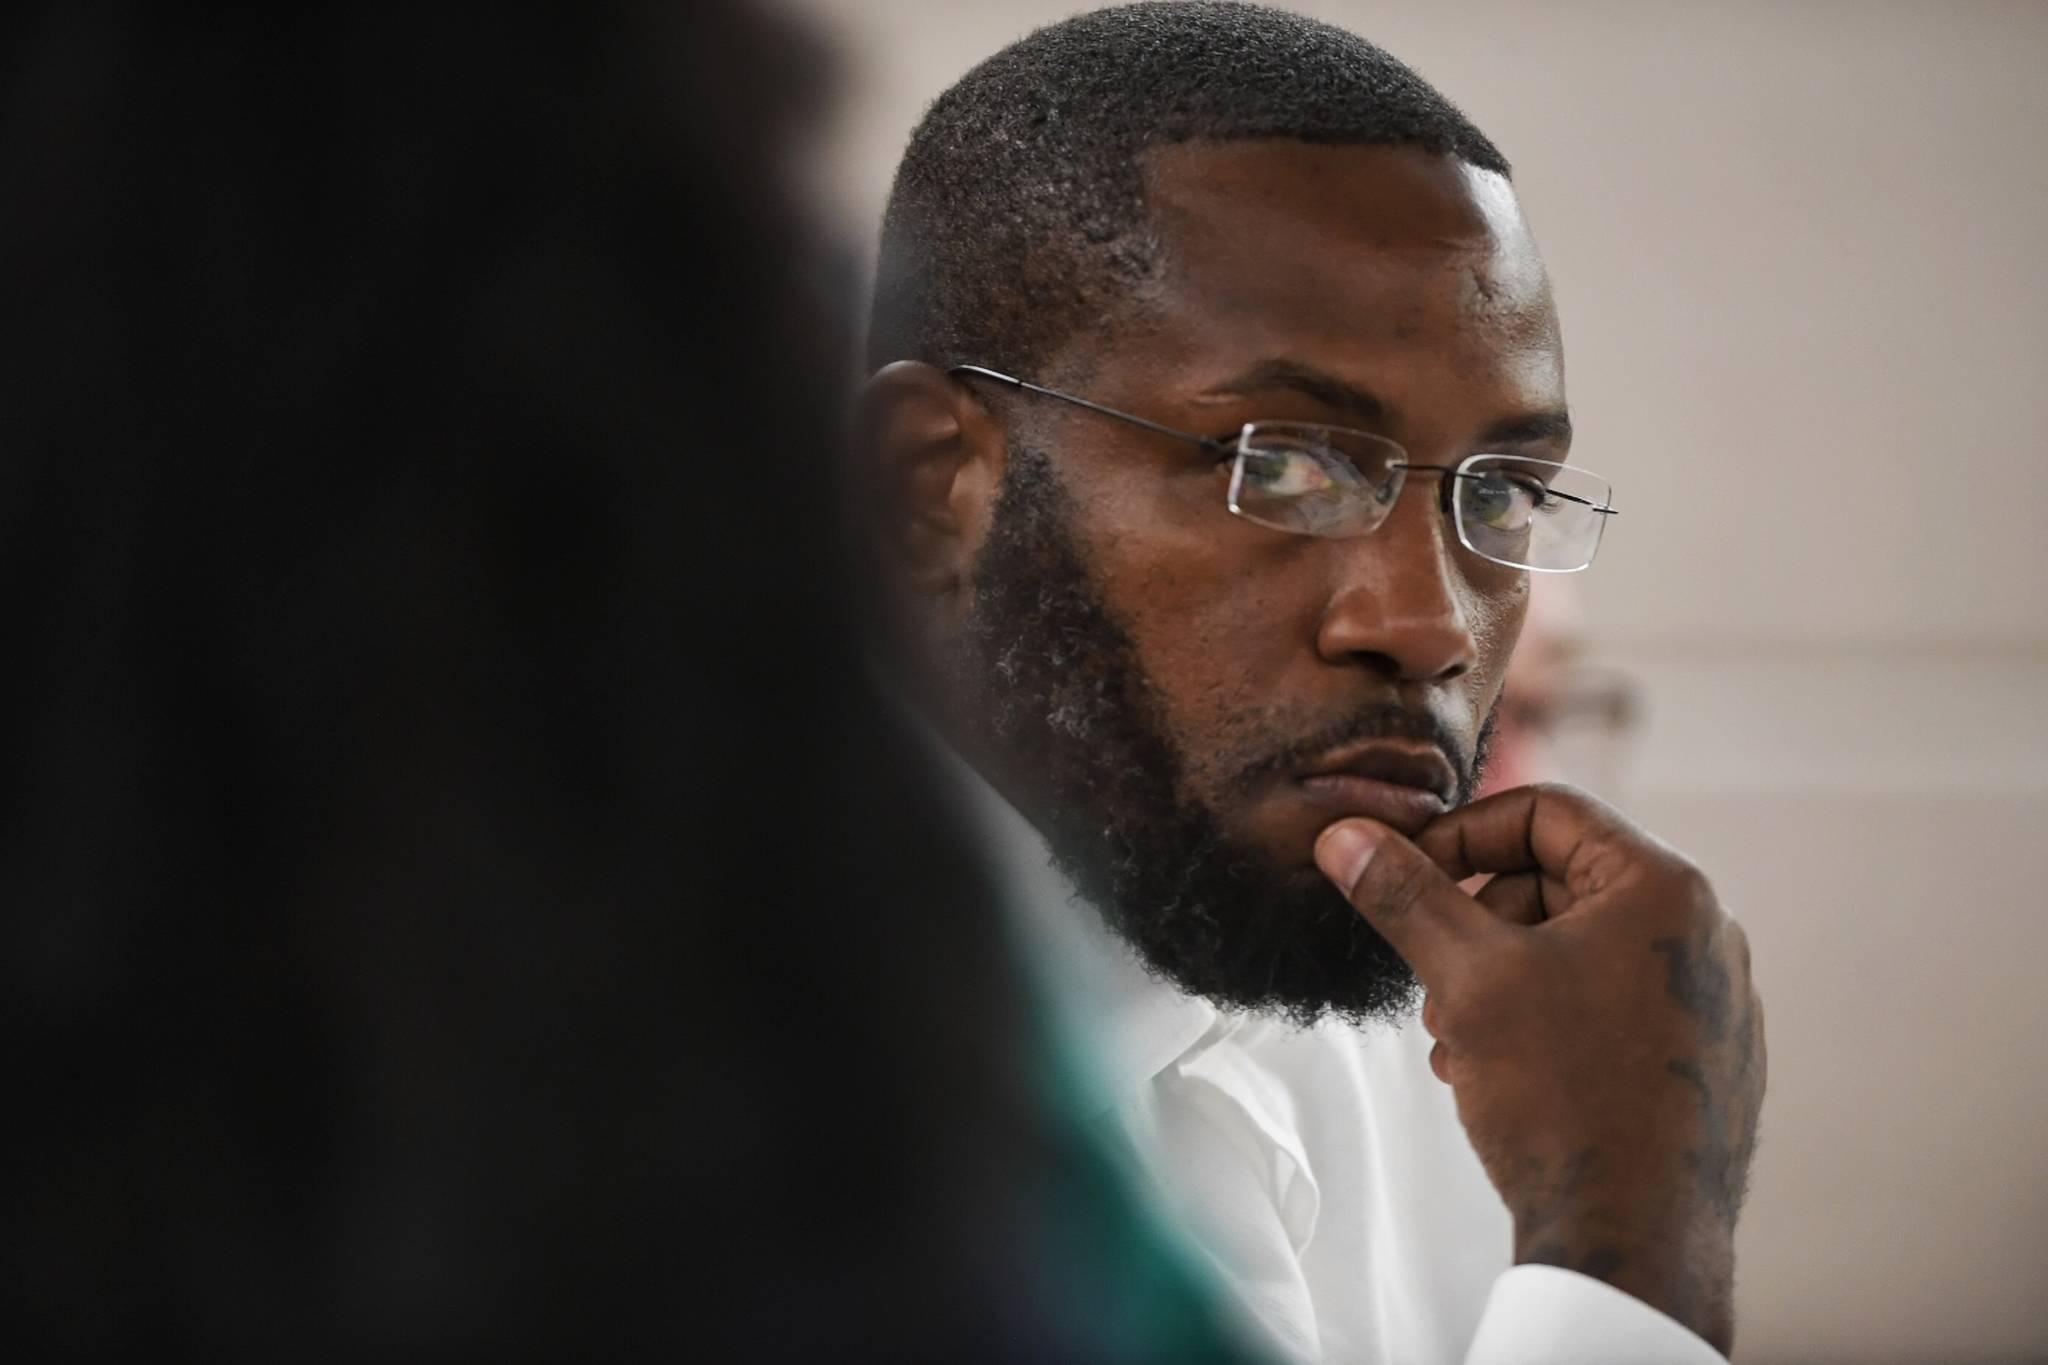 Laron Carlton Graham listens to his attorney, Natasha Norris, in Juneau Superior Court on Tuesday, Sept. 3, 2019, during his trial on two counts of first-degree murder for the Nov. 14, 2015 shooting deaths of 36-year-old Robert H. Meireis and 34-year-old Elizabeth K. Tonsmeire. (Michael Penn | Juneau Empire)